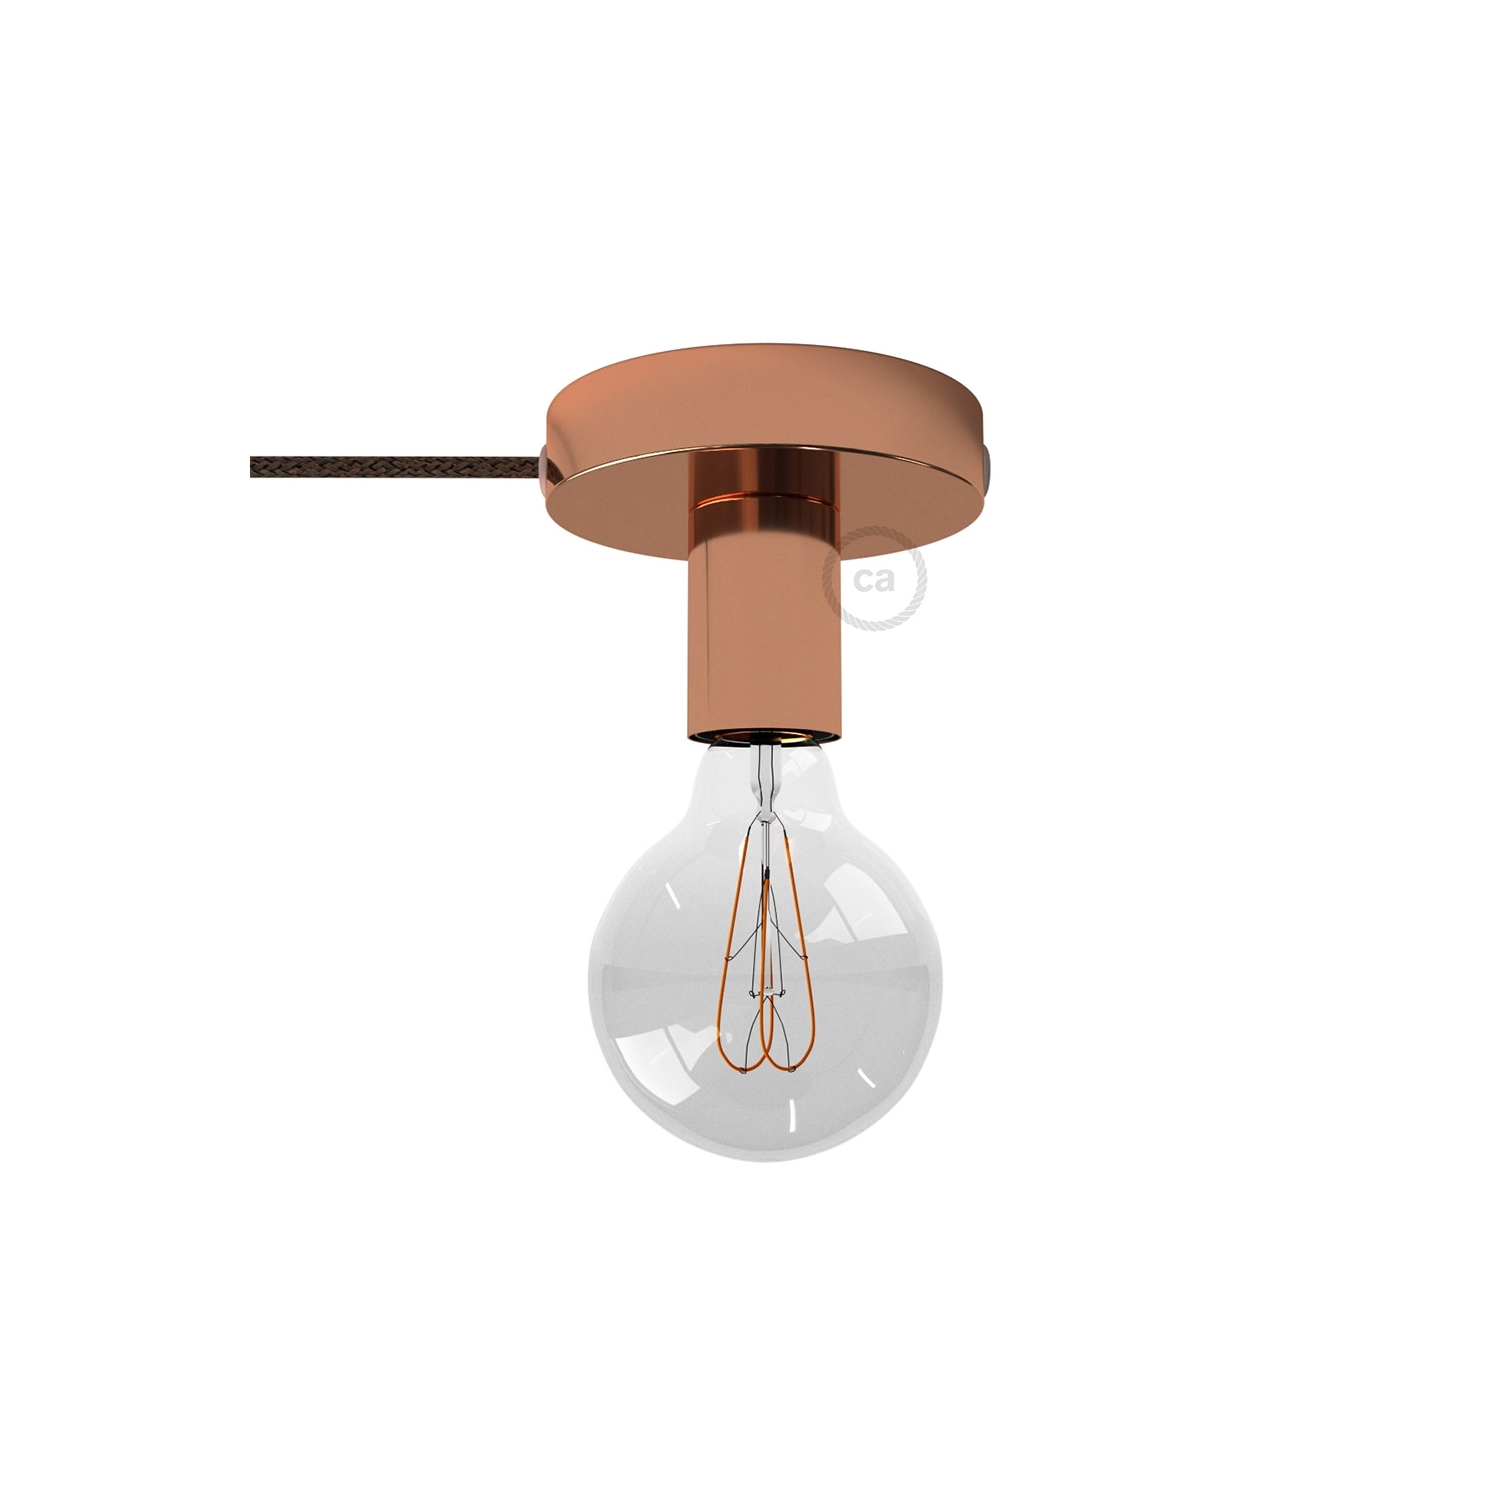 Spostaluce, the coppered metal light source with fabric cable and side holes